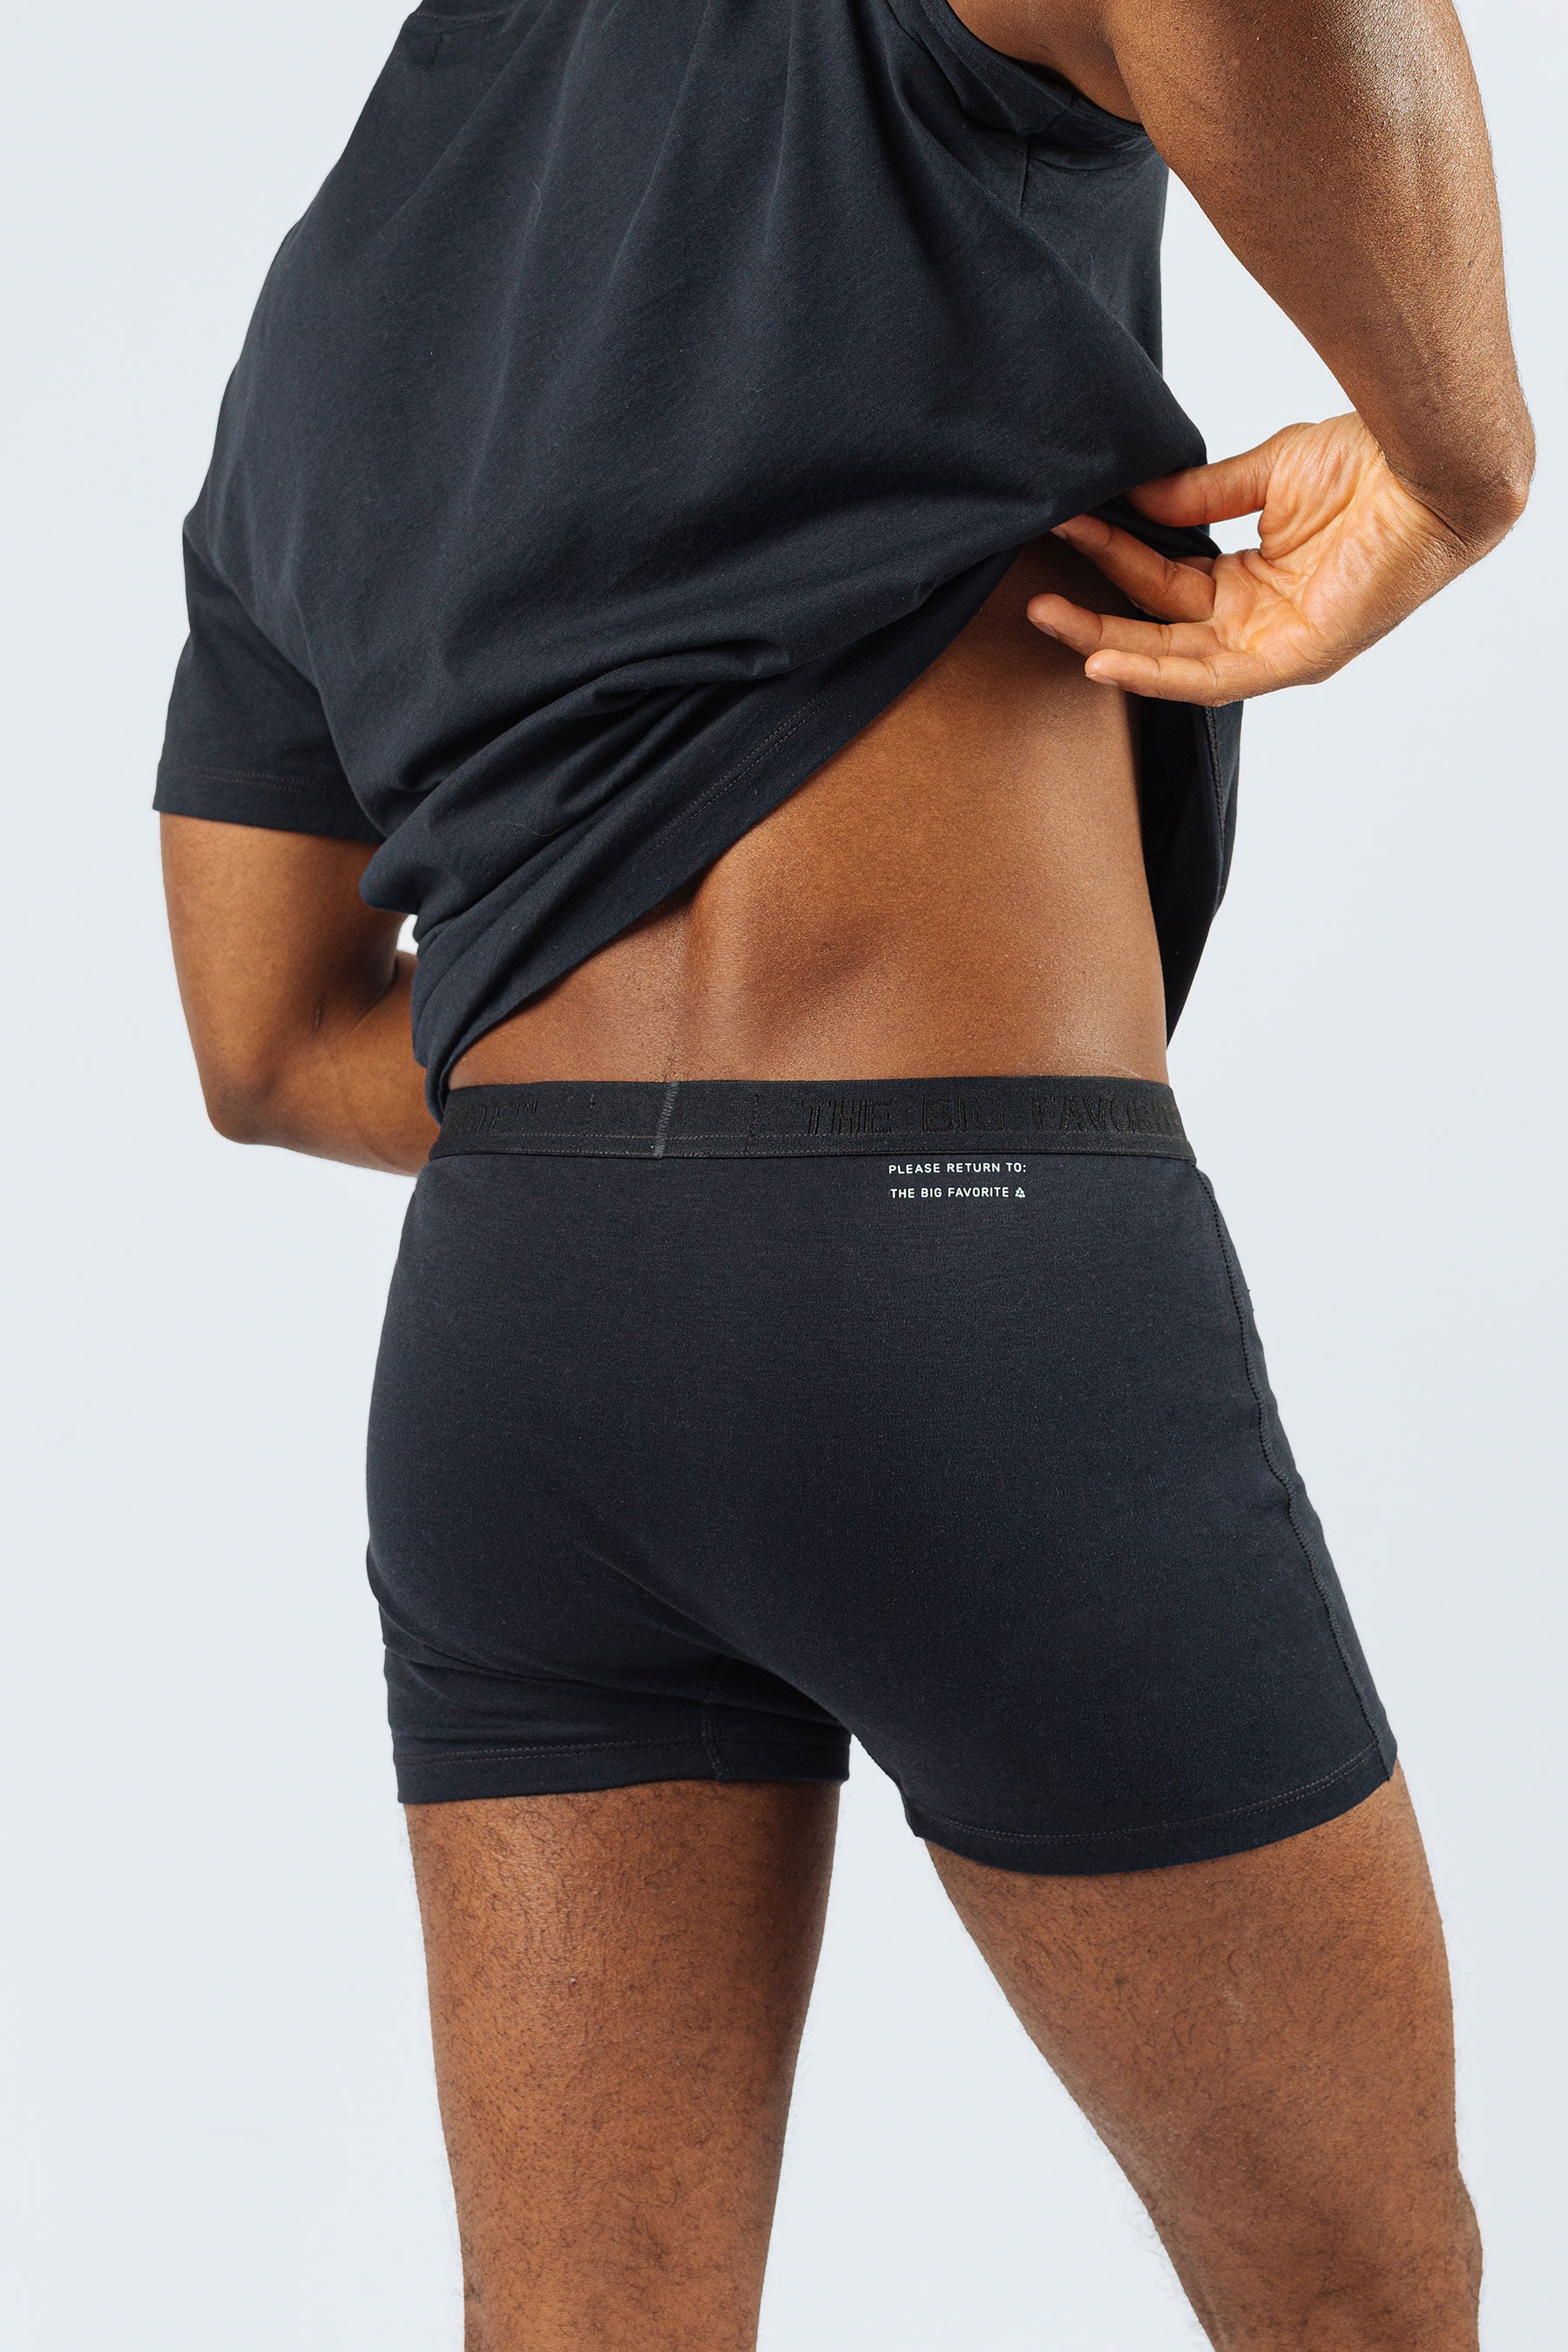 You're my favourite thing to do - Men's Boxer Briefs